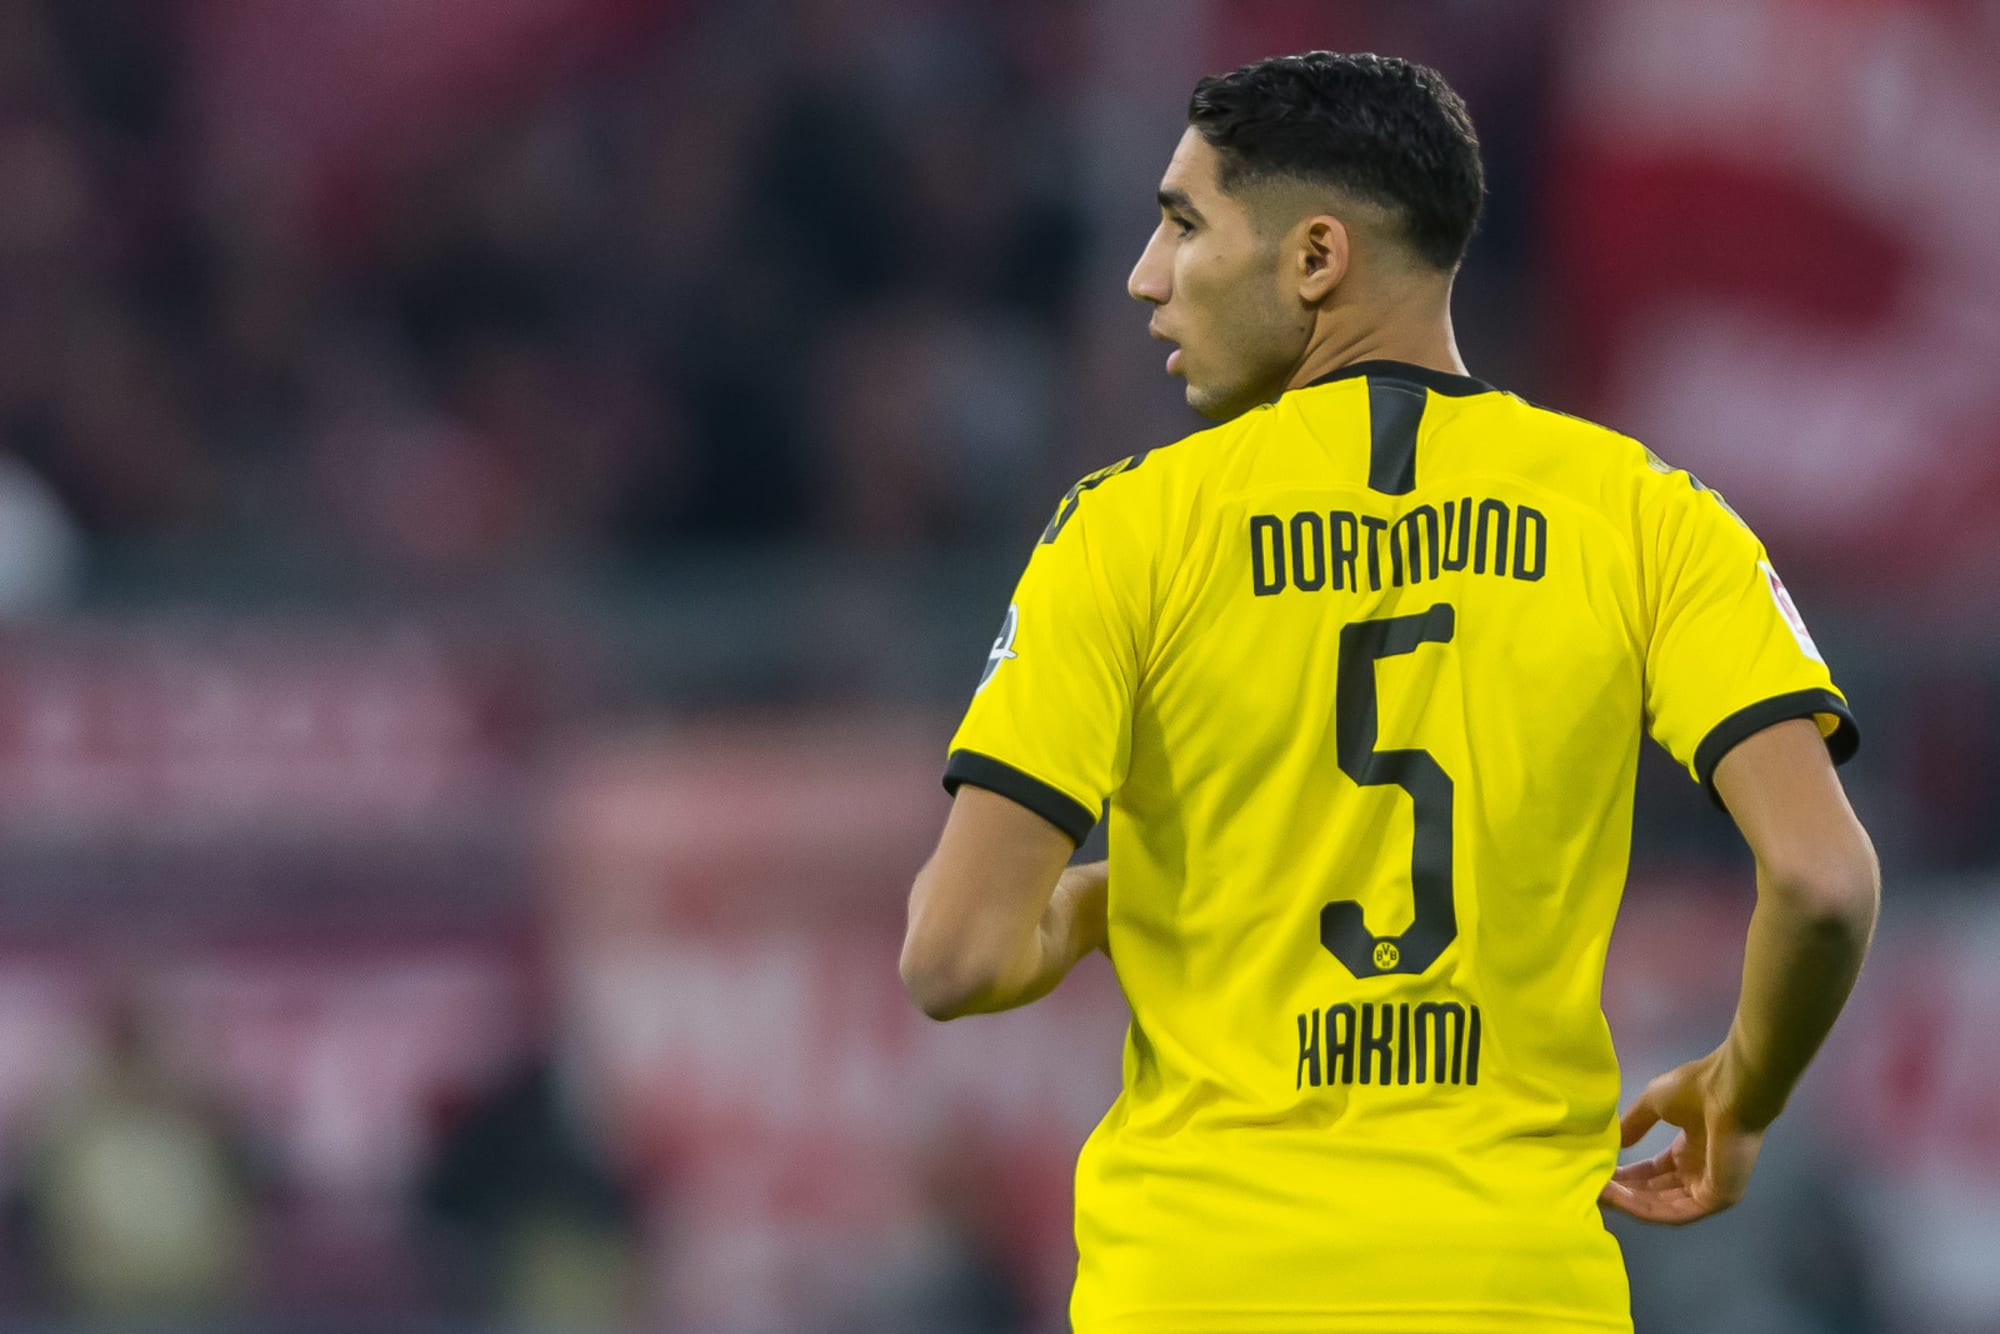 Real Madrid need to reject Arsenal's bid for Achraf Hakimi